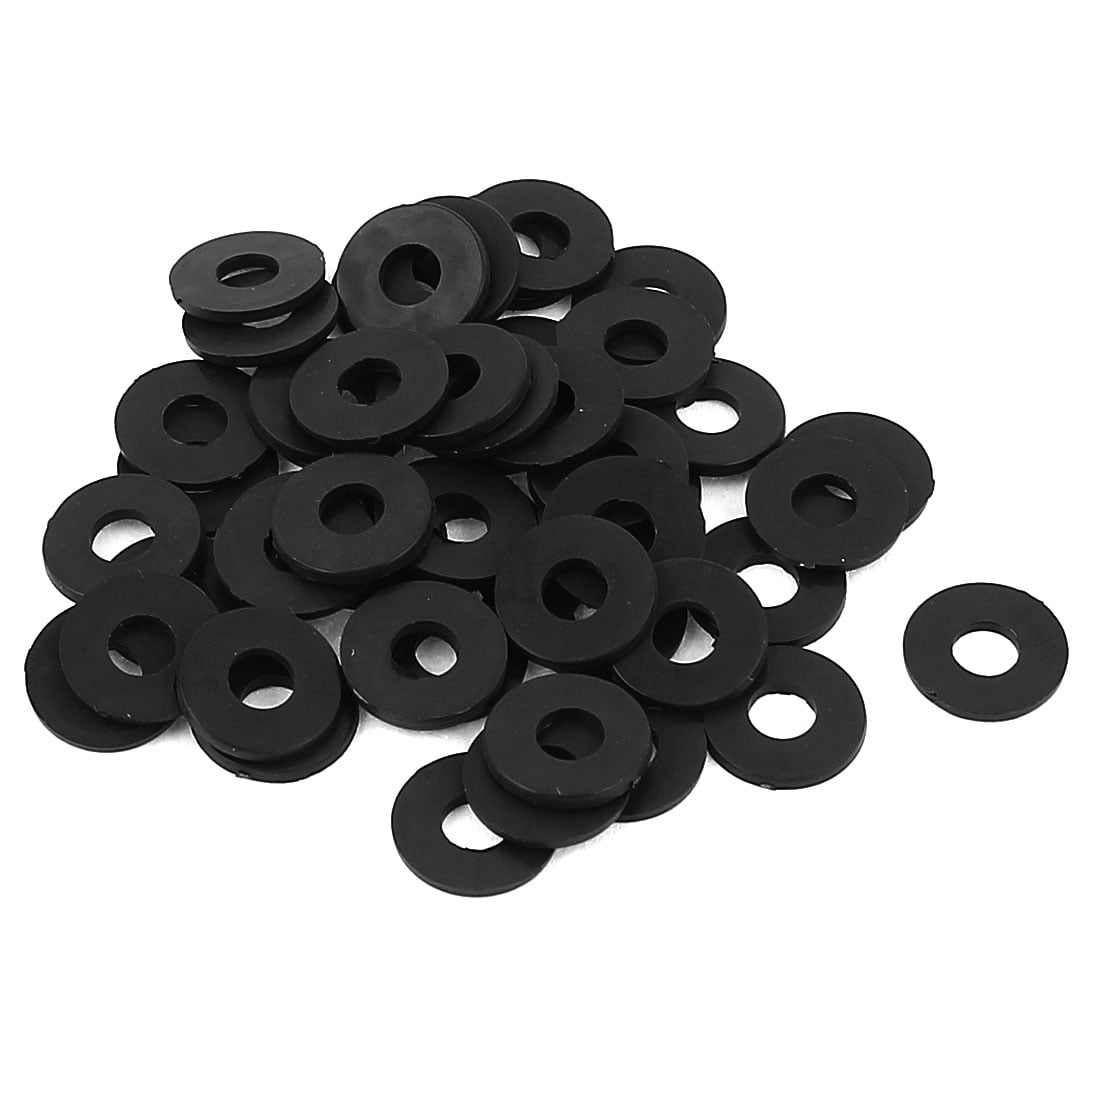 50/100pcs Plastic Nylon Flat Spacer Washer Insulation Gasket Ring For Screw Bolt 